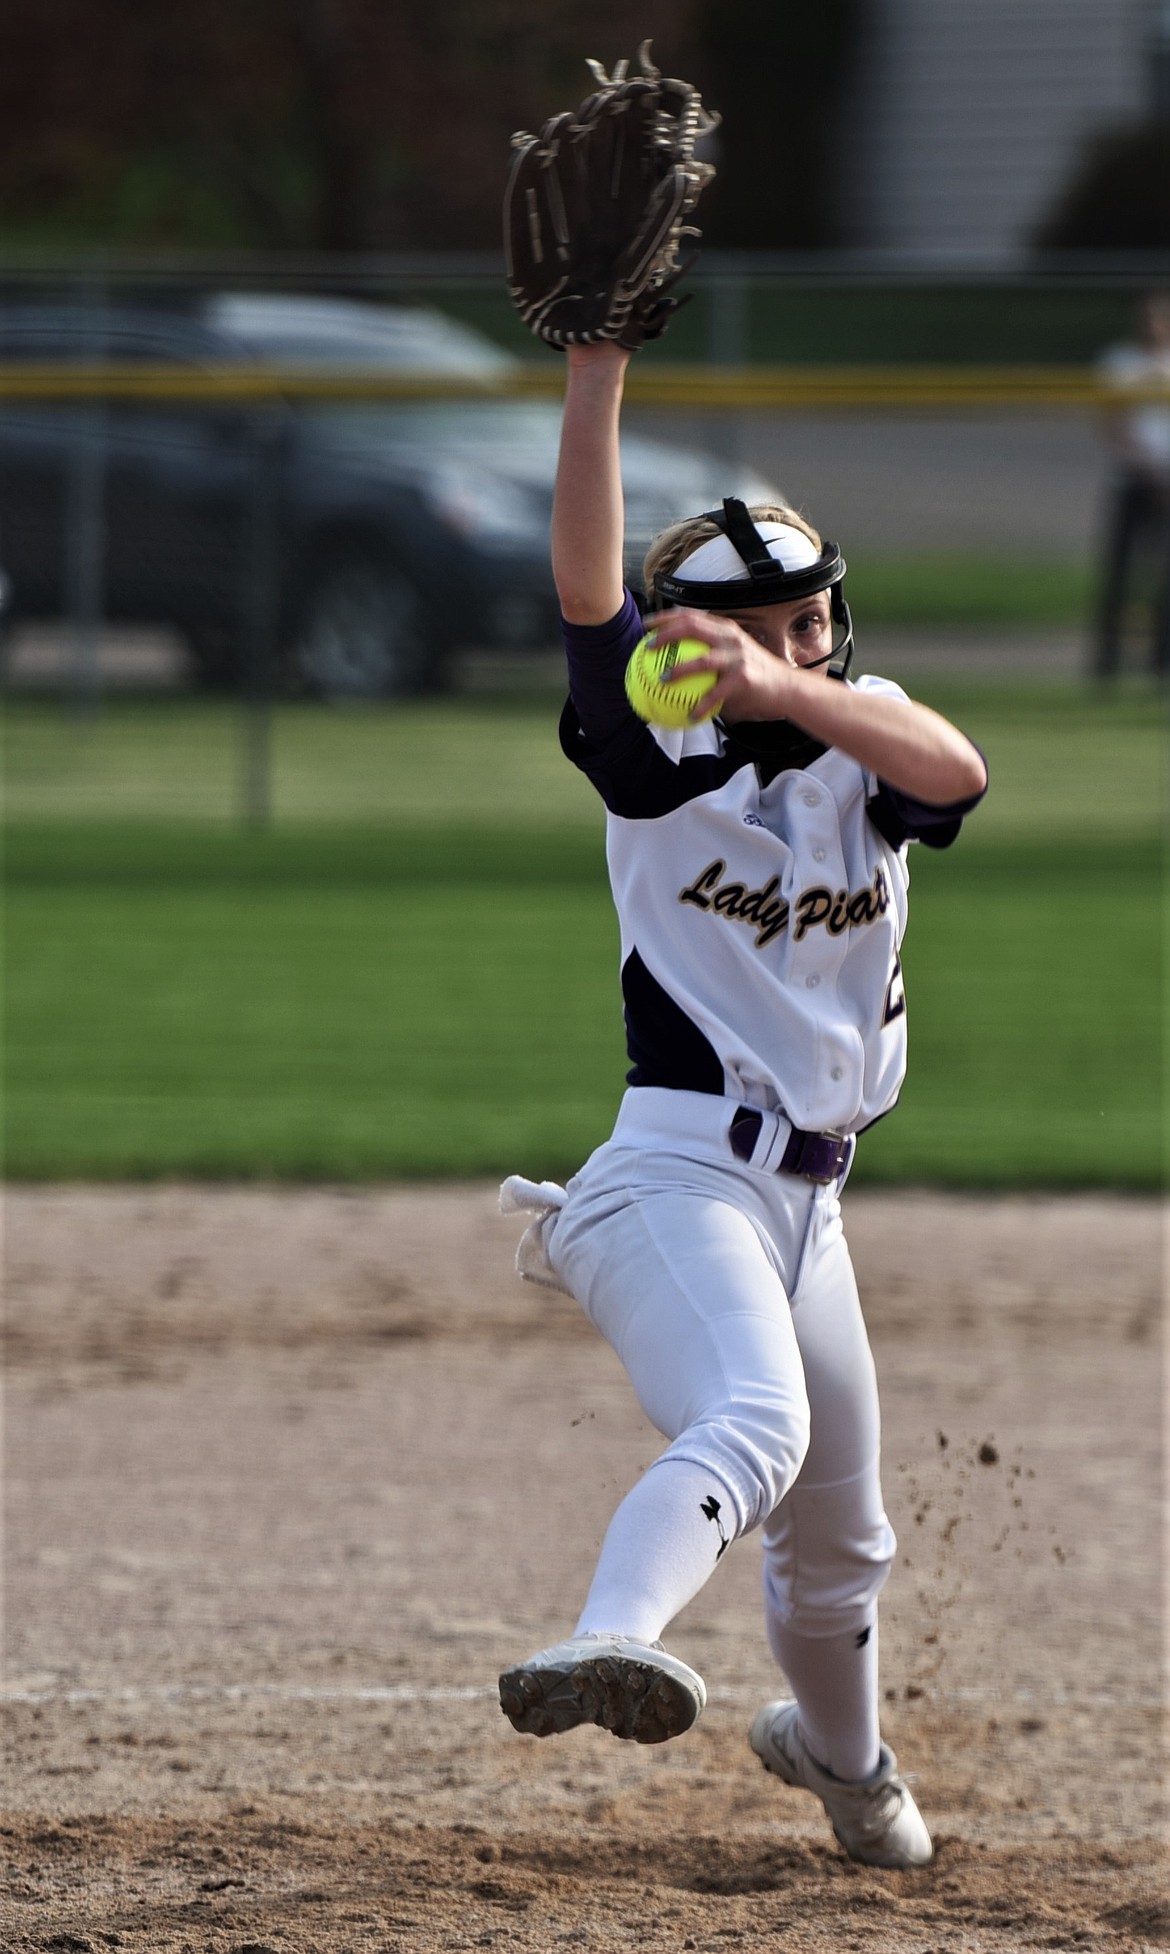 Katelynn Druyvestein struck out eight and allowed one hit in five innings against Flathead. (Scot Heisel/Lake County Leader)